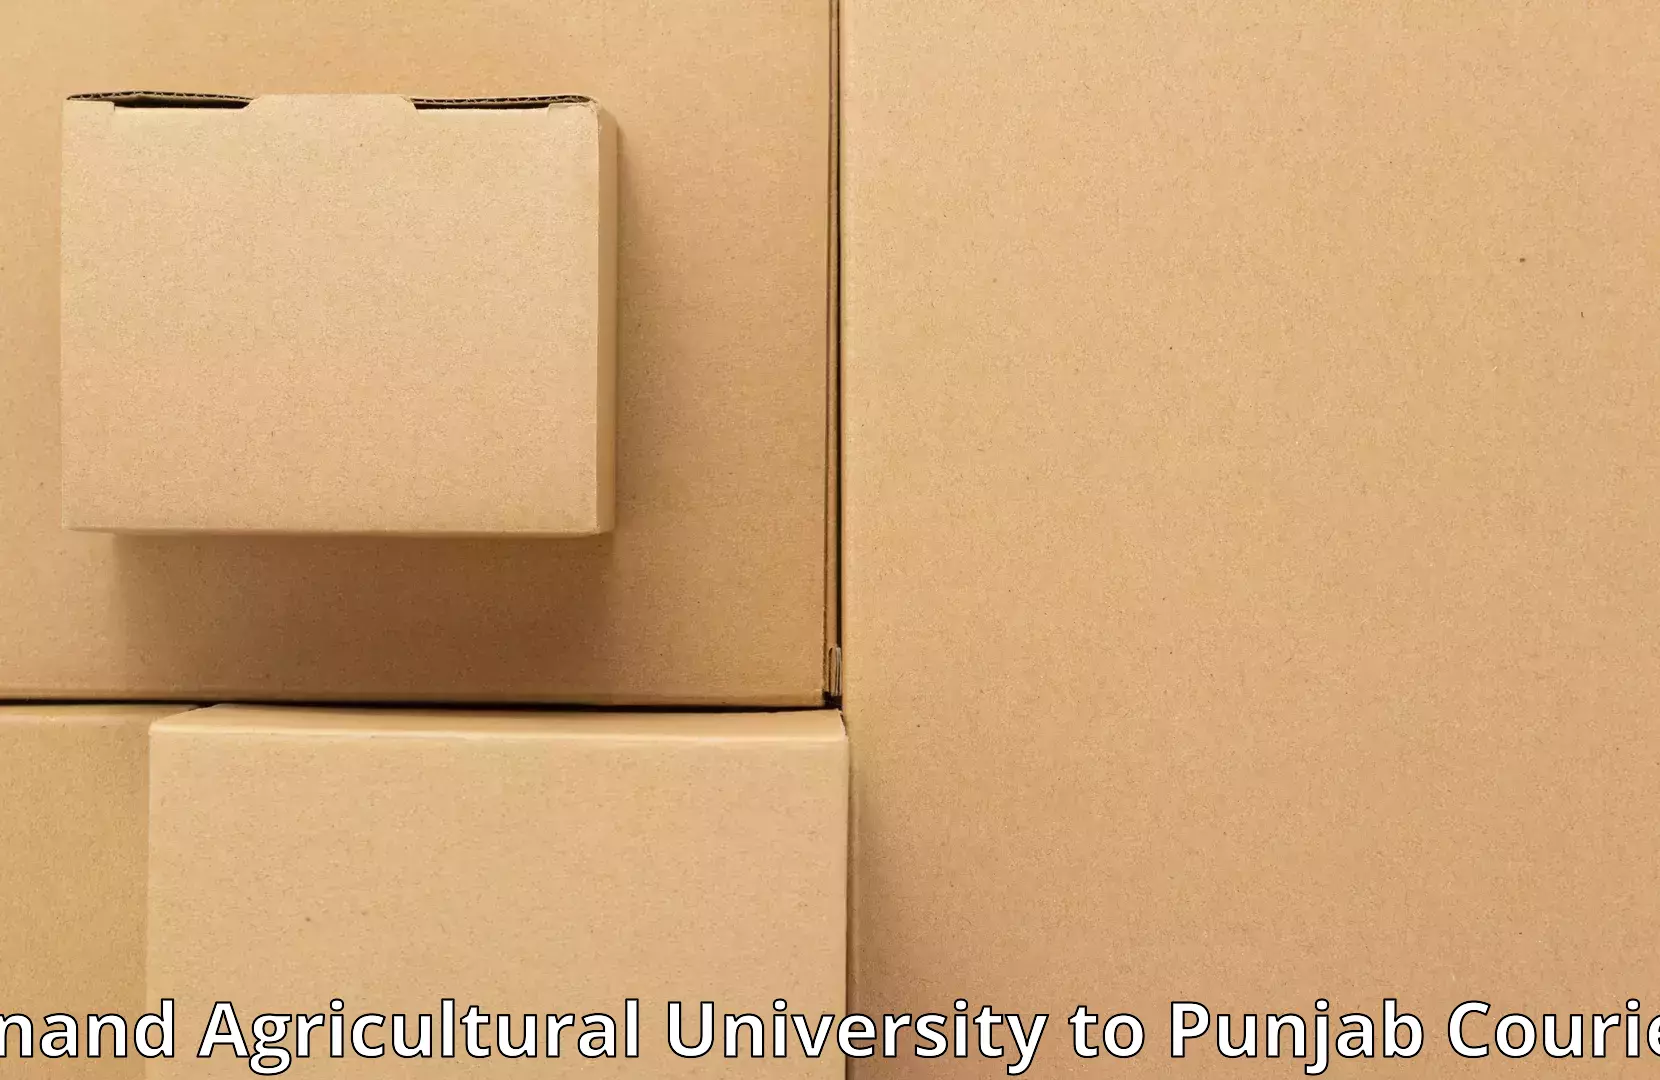 Quality relocation assistance Anand Agricultural University to Fazilka